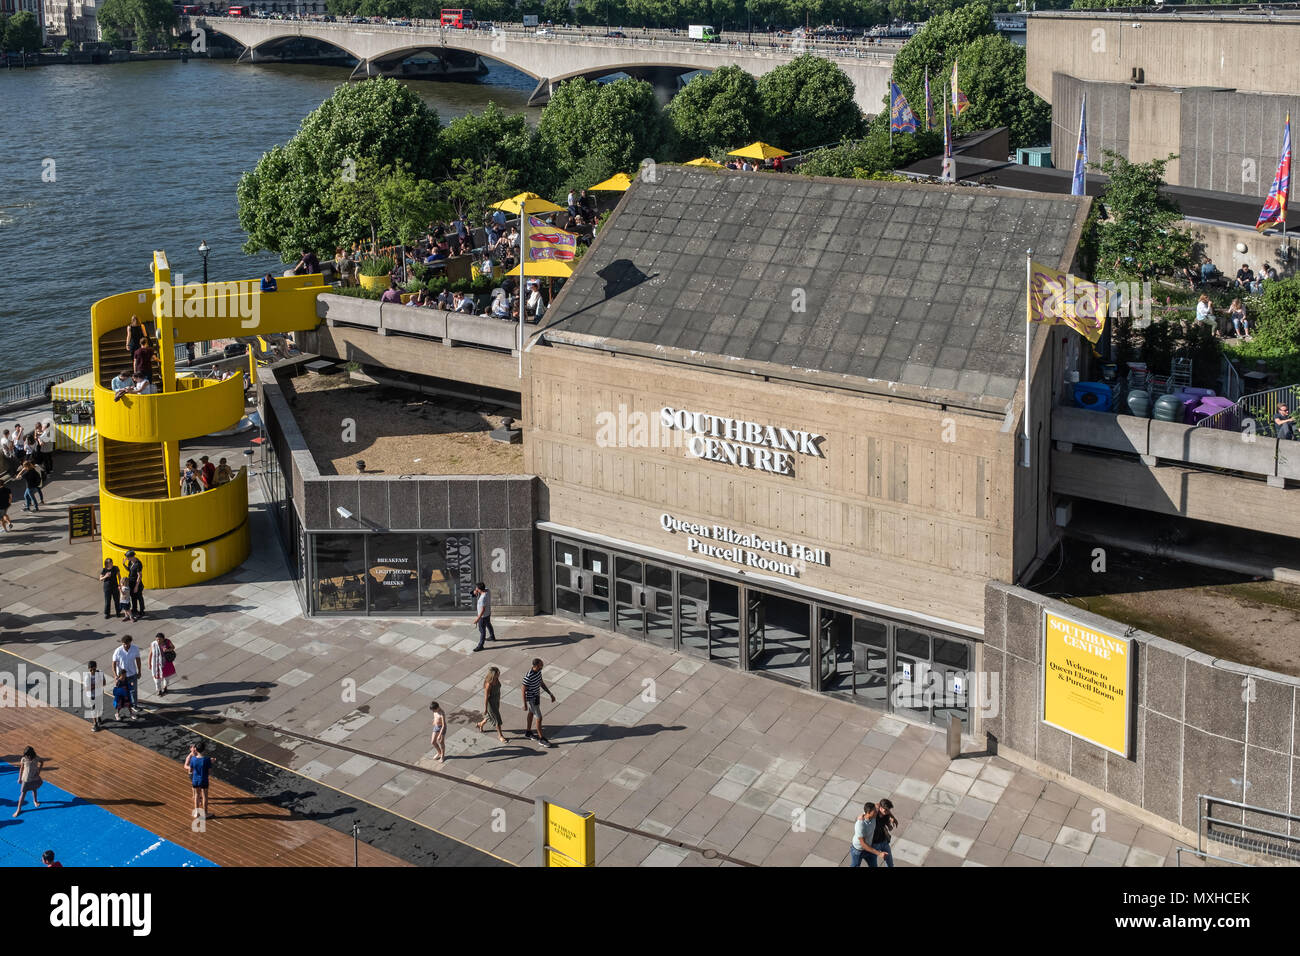 Queen Elizabeth Hall und Purcell Room, Southbank Centre, London, England Stockfoto